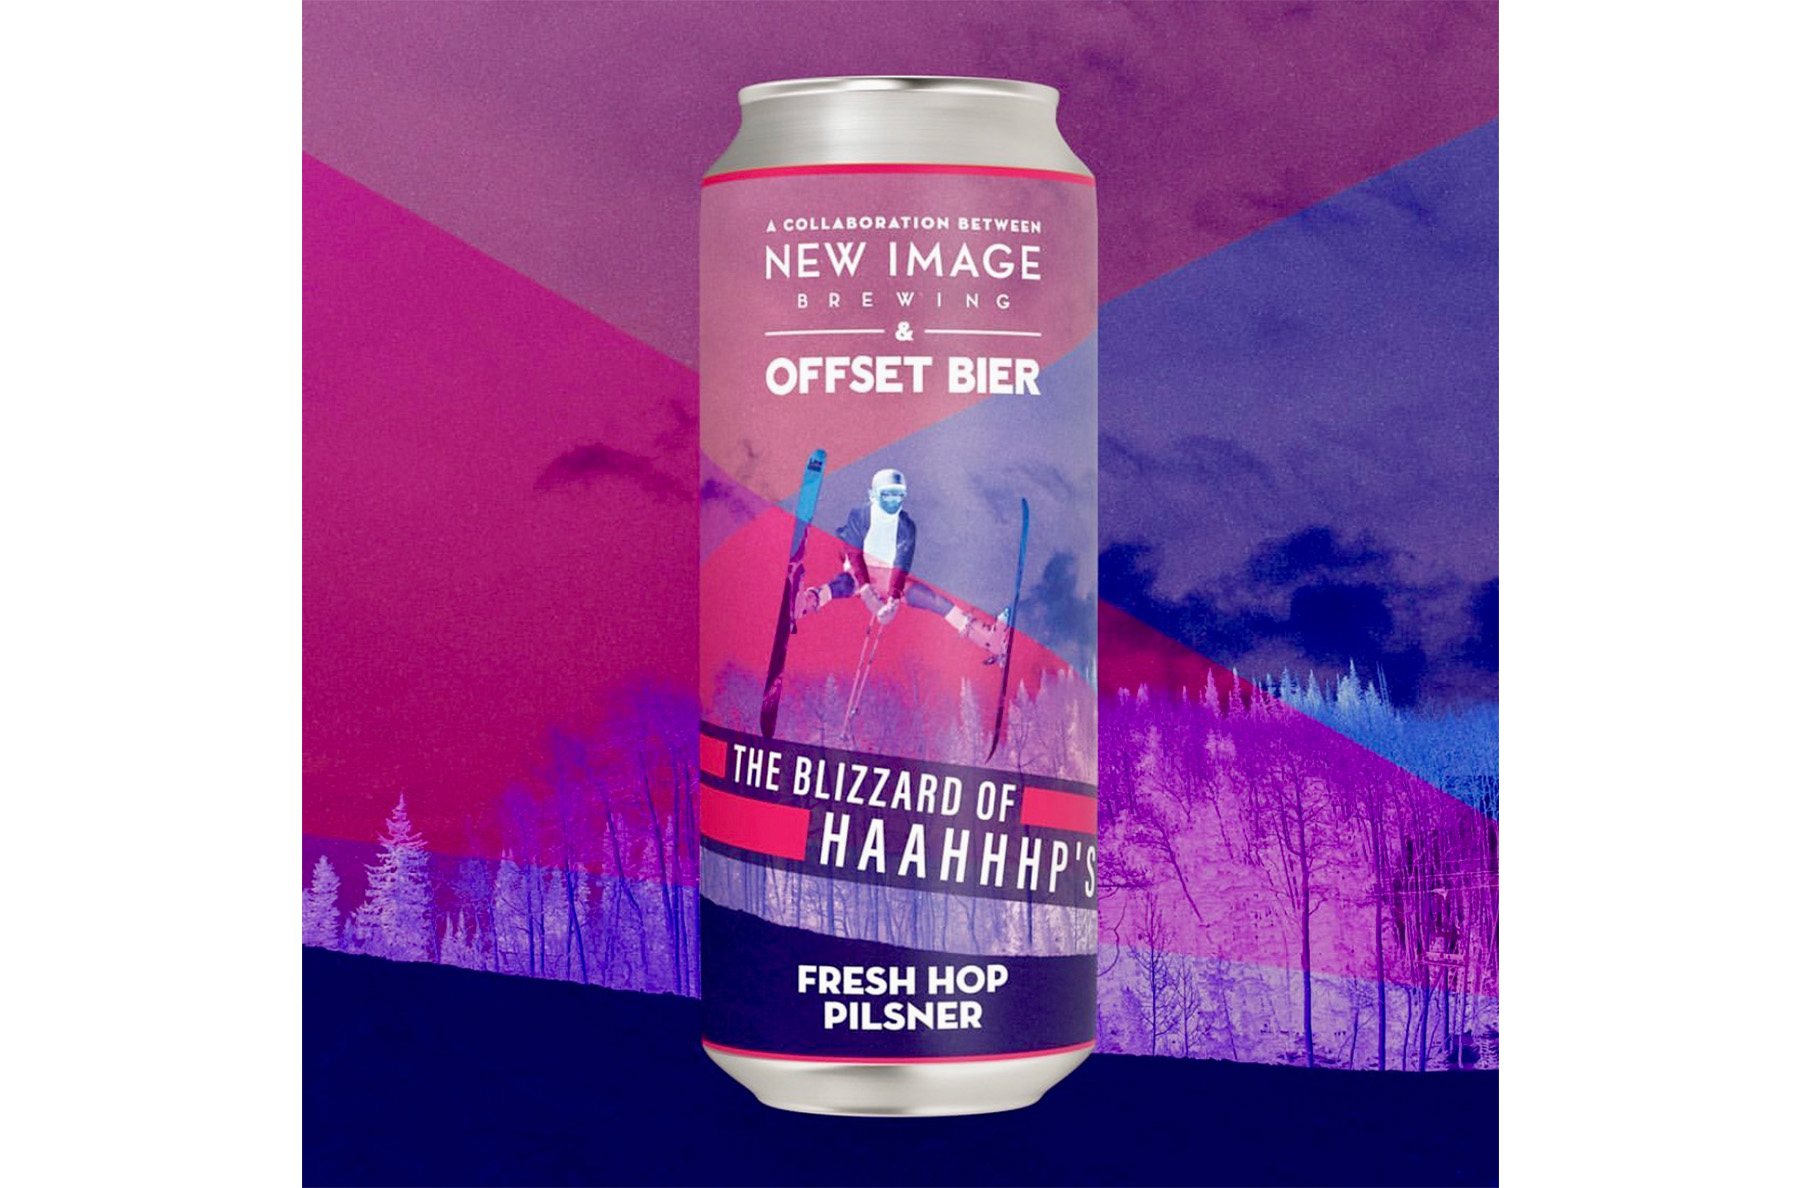 New Image Brewing x Offset Bier: The Blizzard of Haahhhp's